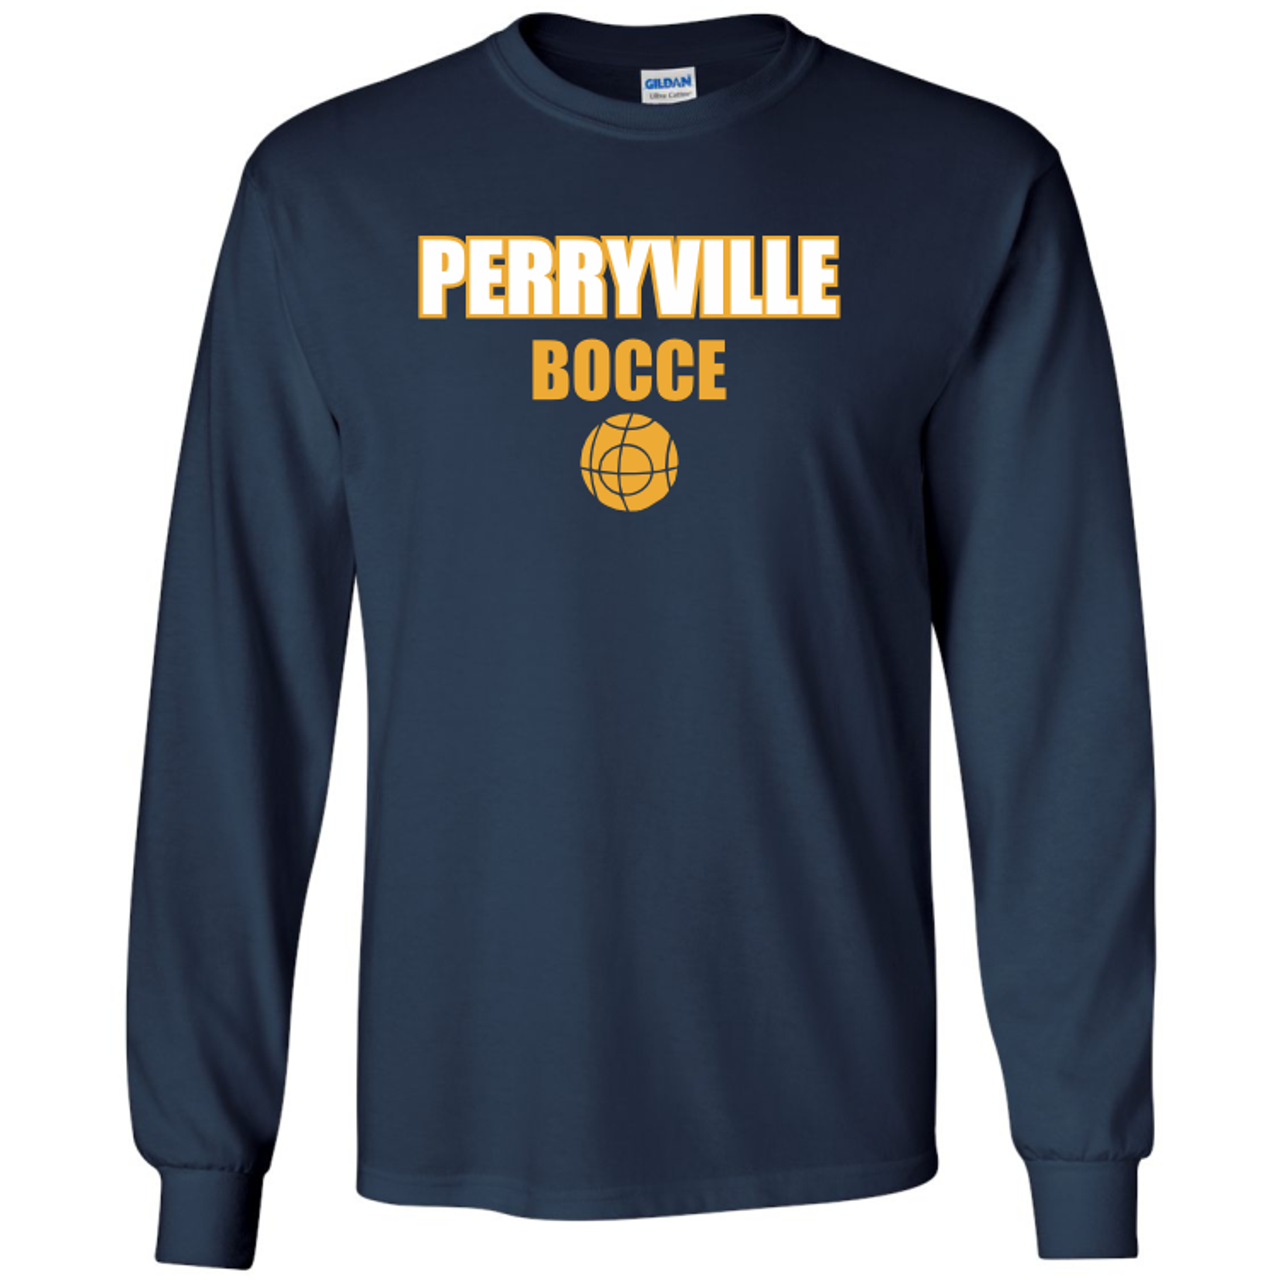 Perryville MS Bocce Tee, Navy